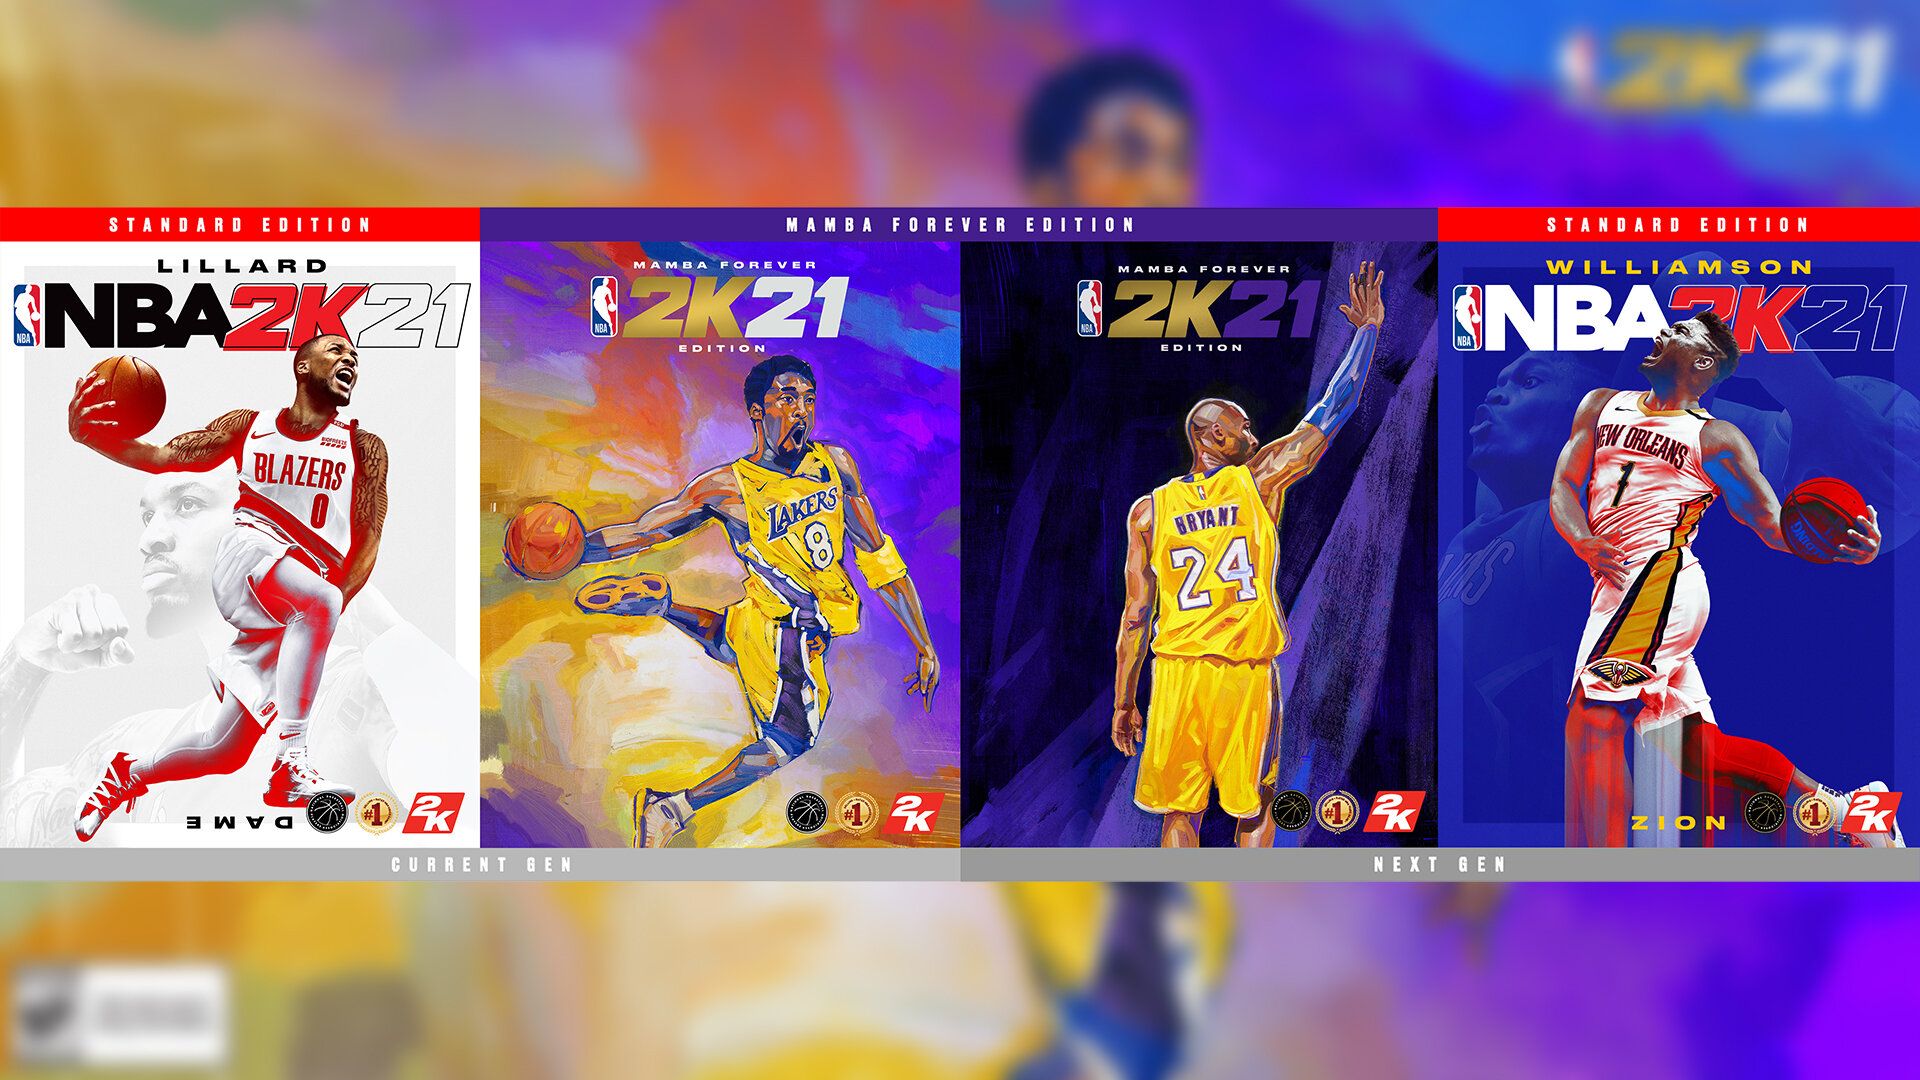 NBA 2K21 unveils it's final cover athlete and a release date